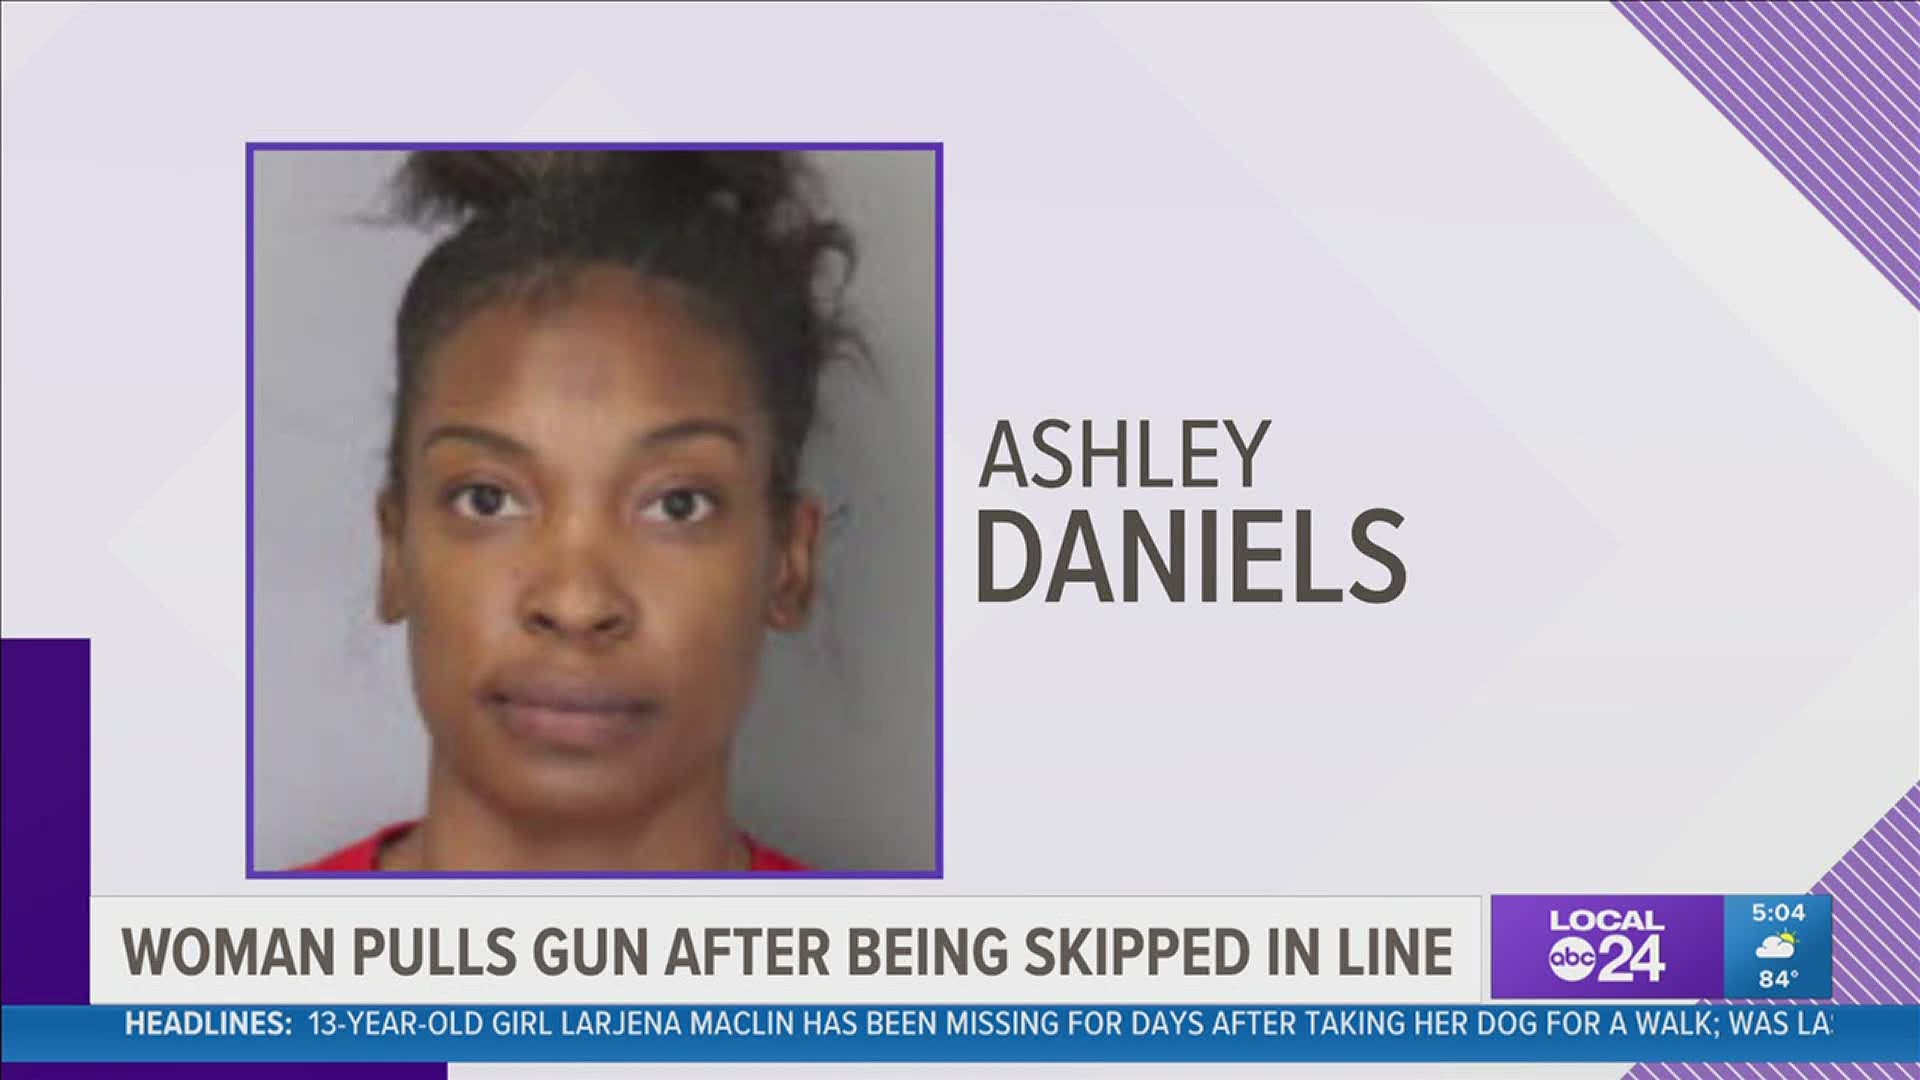 Ashley Daniels is charged with aggravated assault.